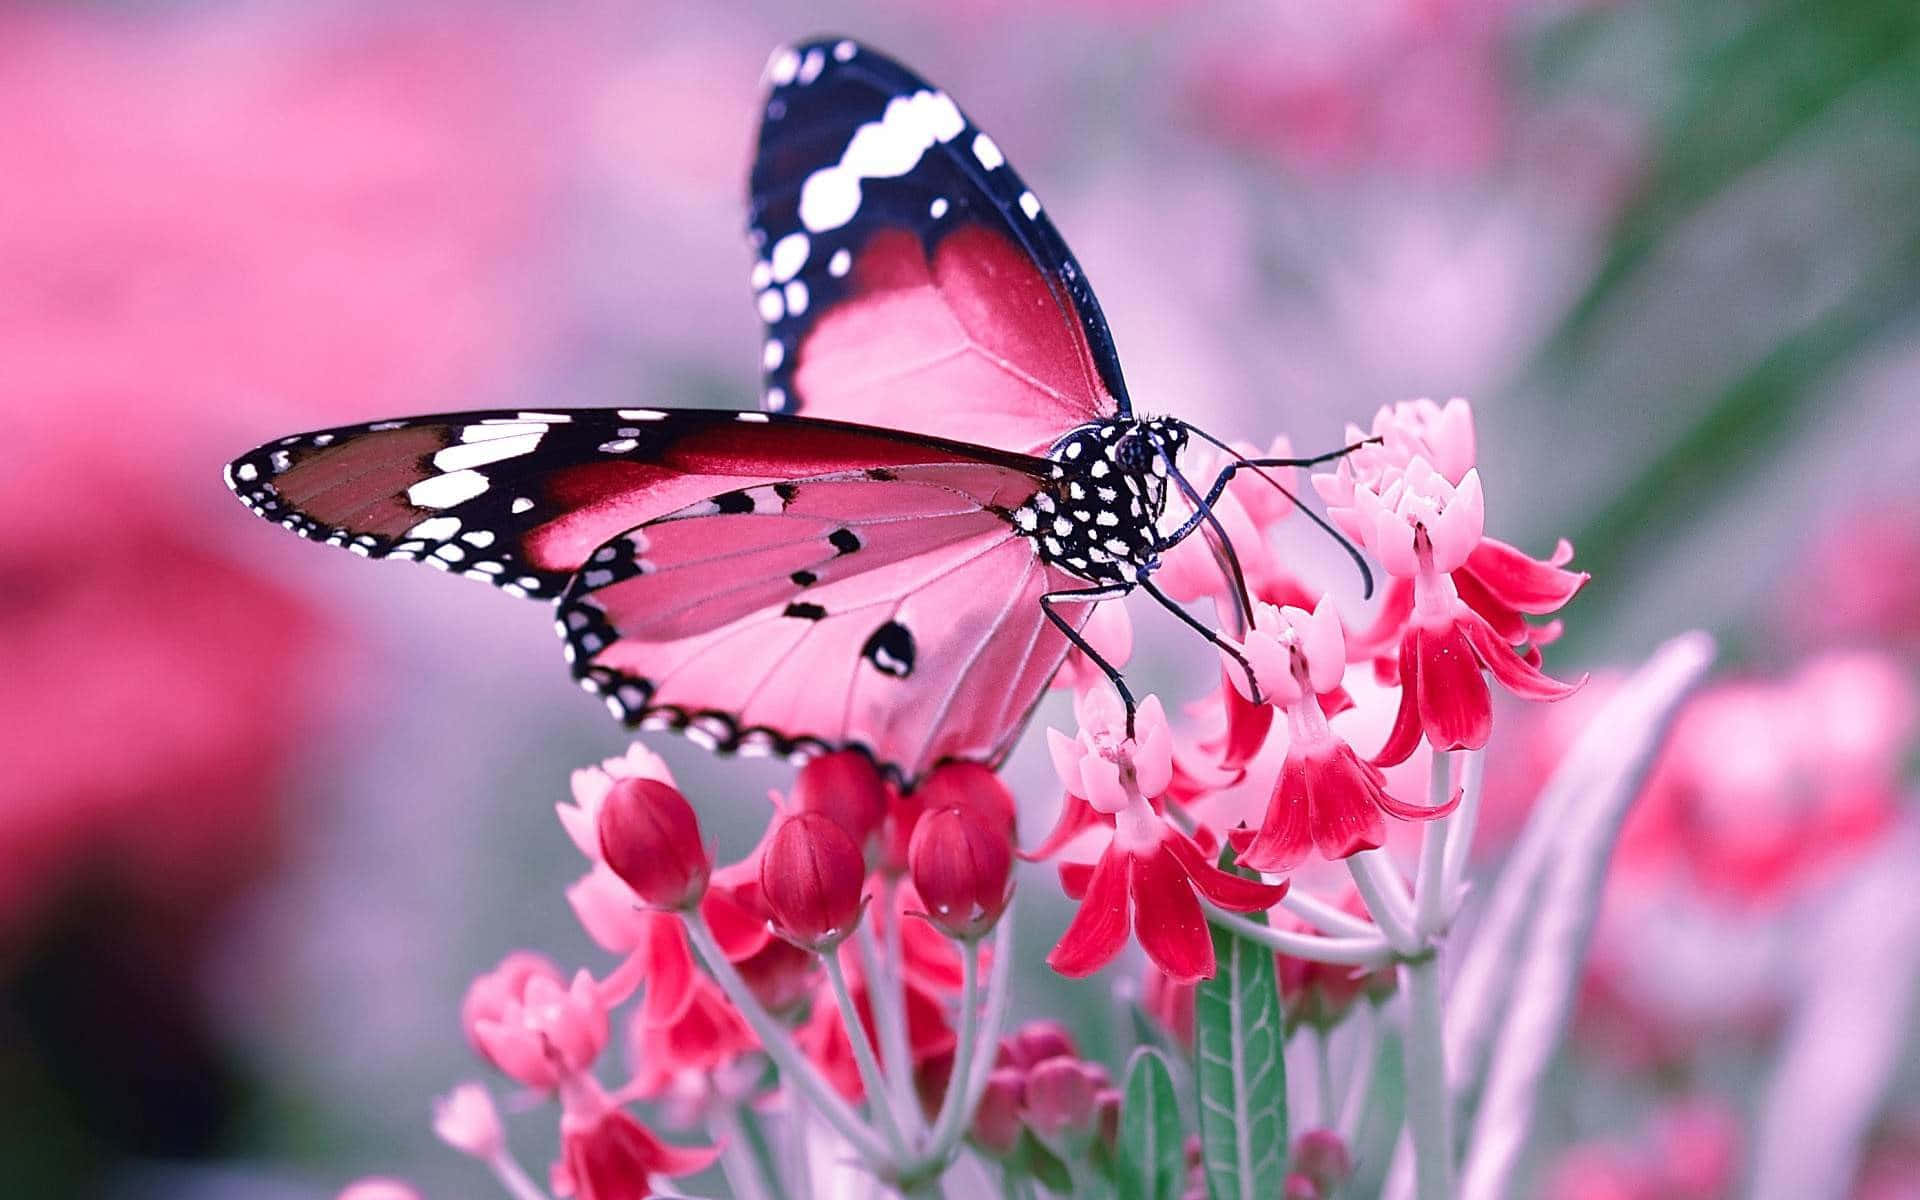 A close-up of a beautiful butterfly at rest Wallpaper